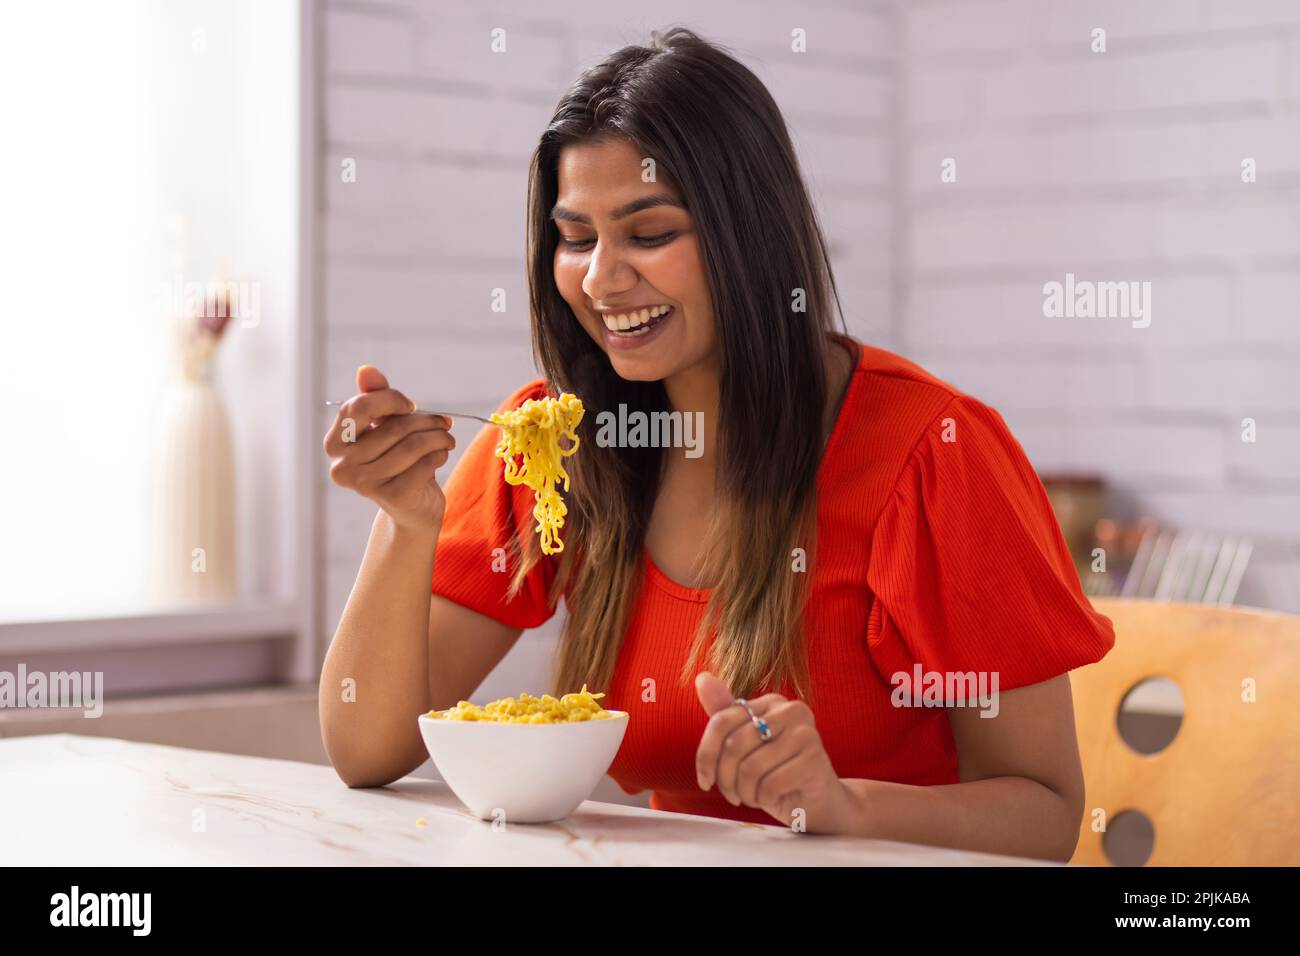 Portrait of woman eating noodles in kitchen Stock Photo